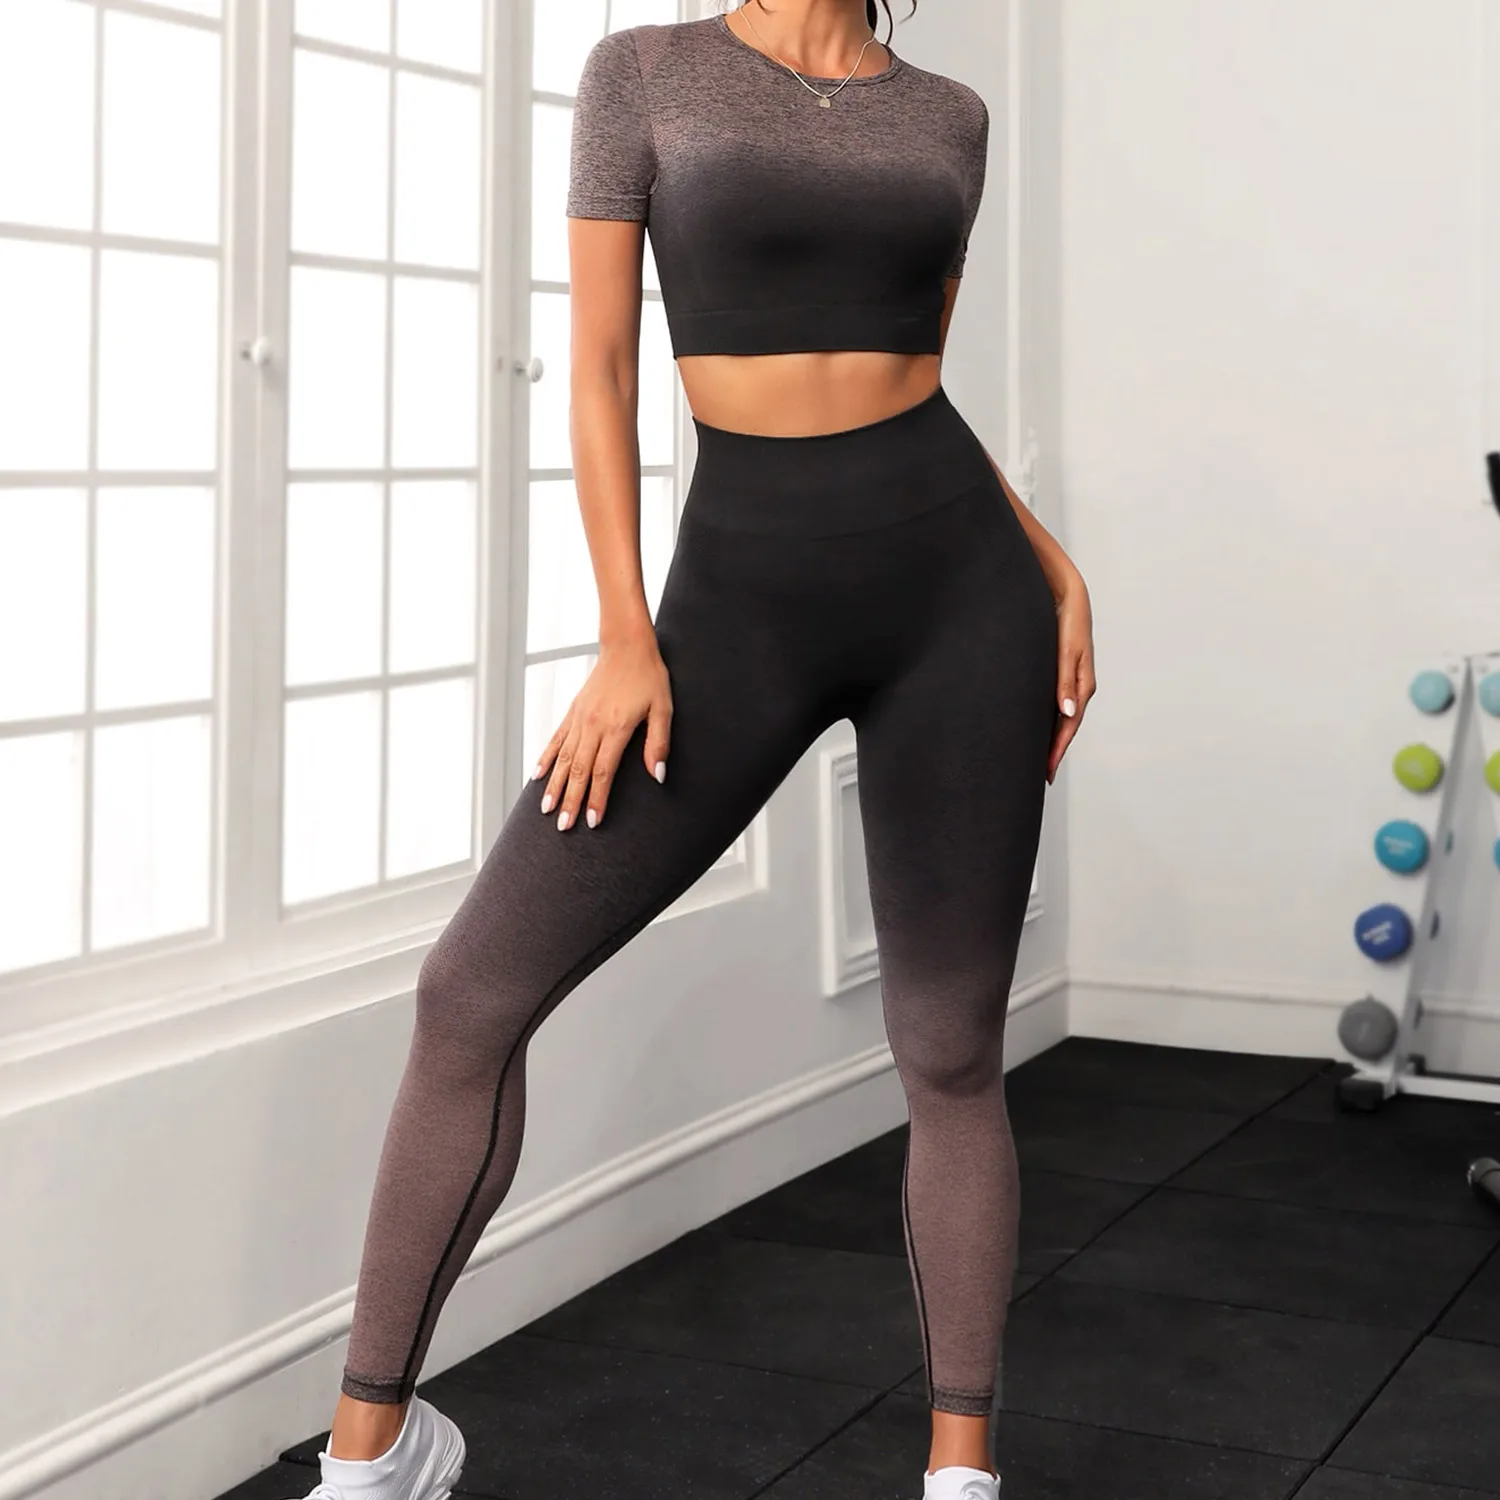 Hot Girls Seamless Tight Yoga Set New Design Contrast Color 2PCS Fitness Set Short Sleeve Top With Leggings Gym Suit